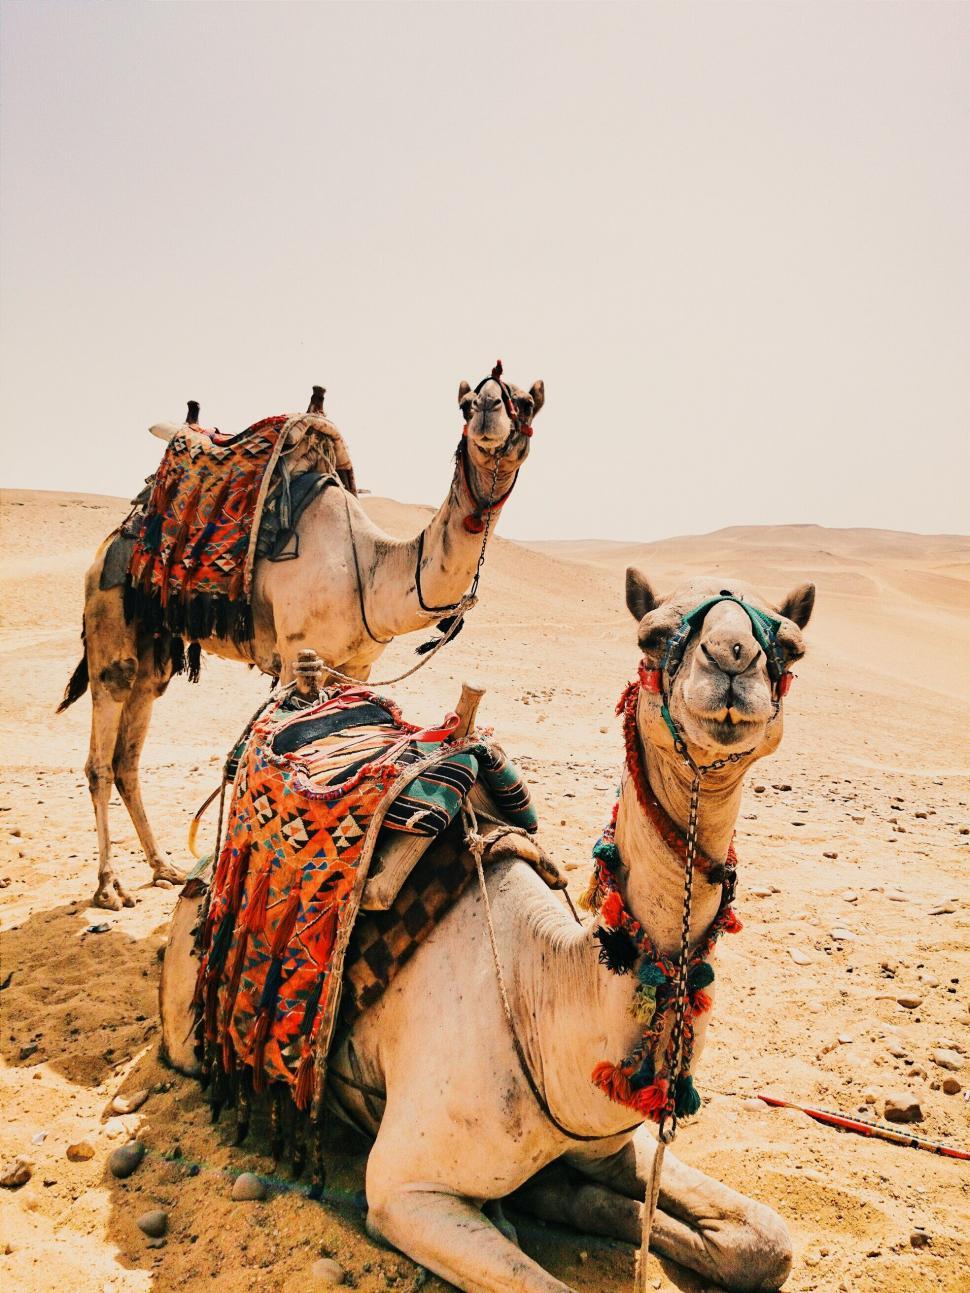 Free Image of Camels in the desert  